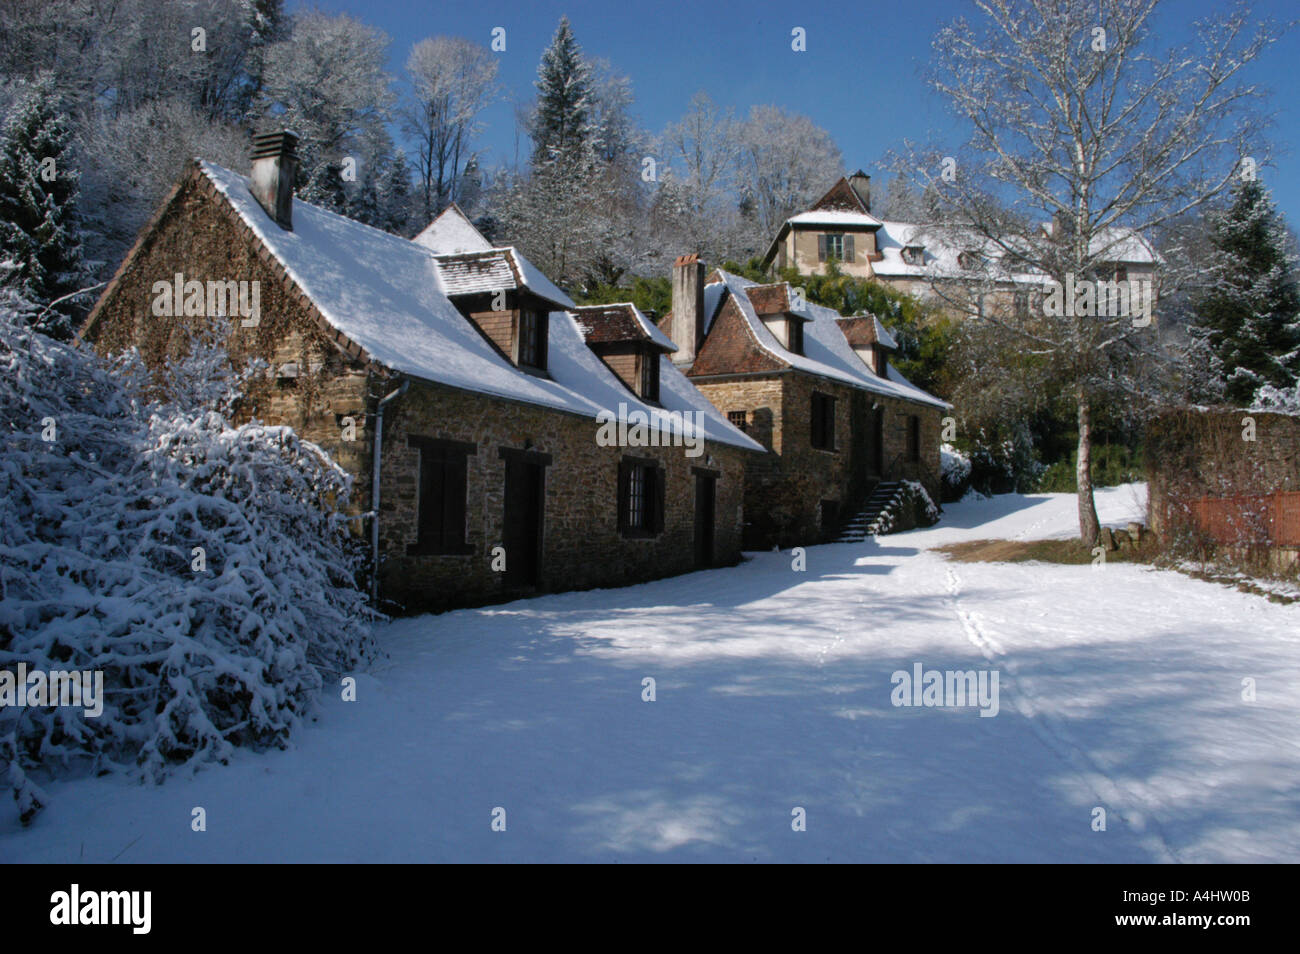 french winter holiday gites in the snow with trees Stock Photo